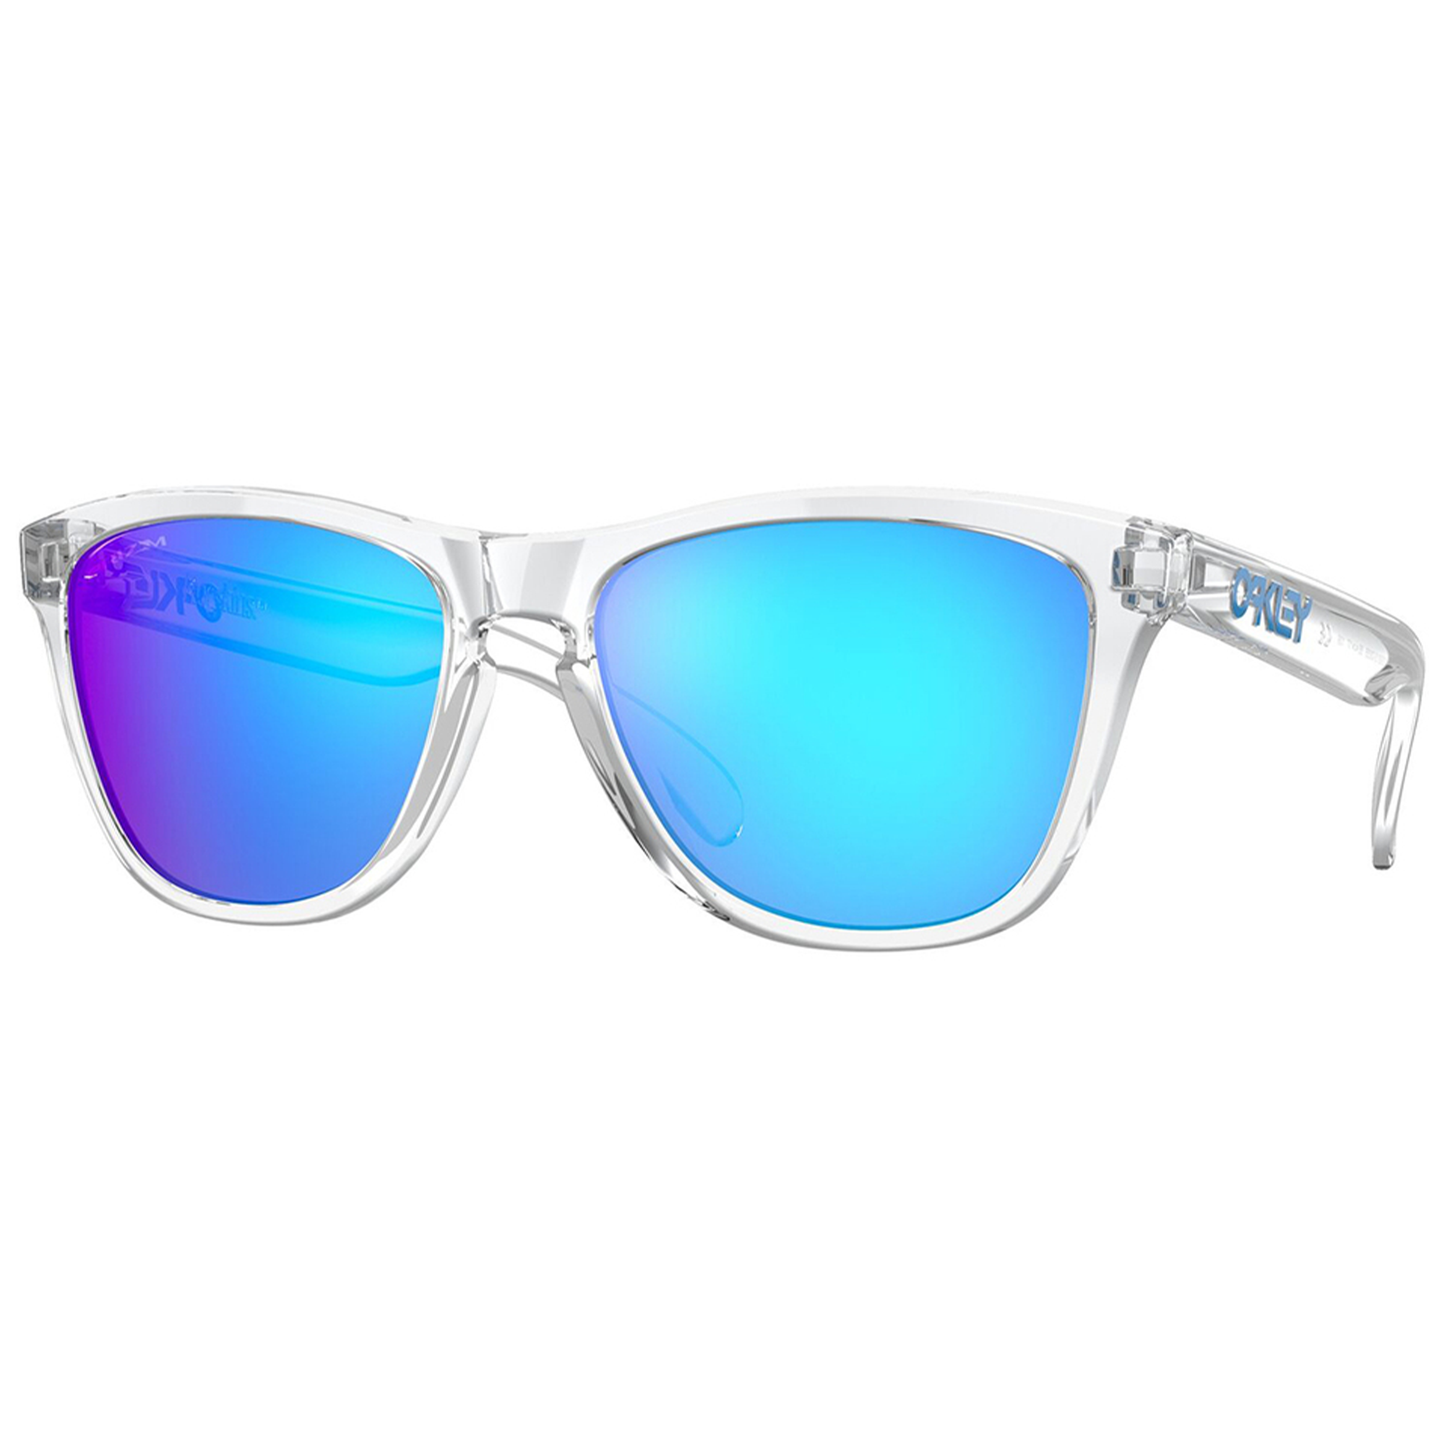 Oakley Frogskins Sunglasses (Crystal Clear) Prizm Sapphire Lens - Free Case